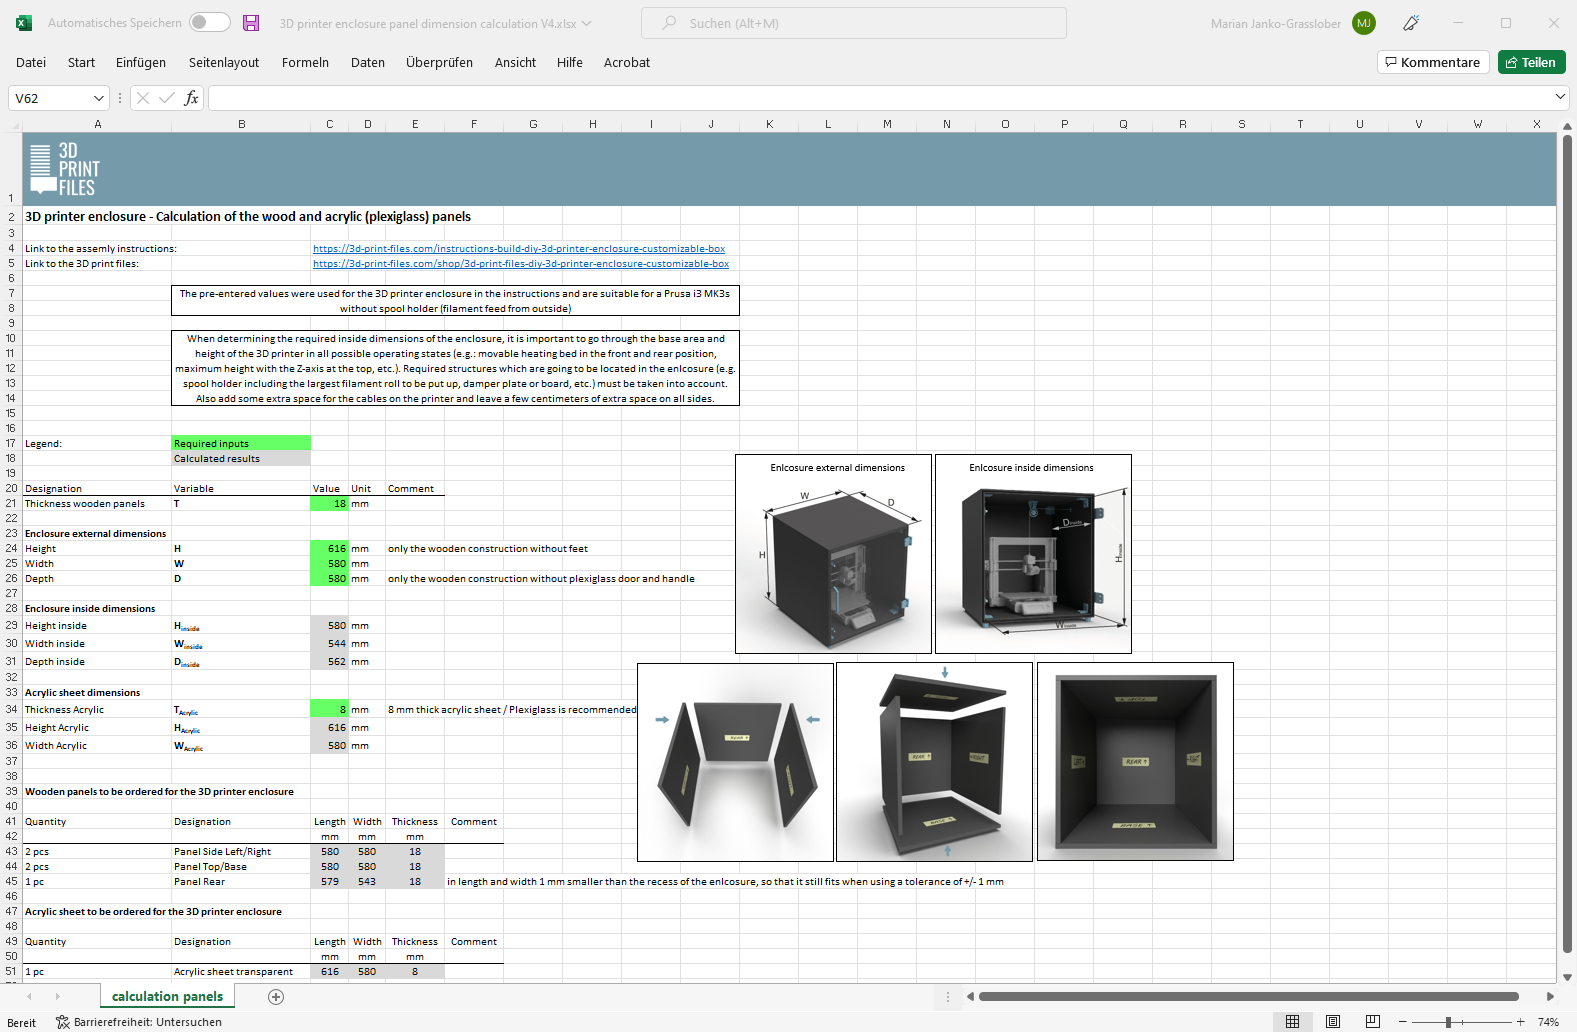 Screenshot of the Excel calculation sheet for the calculation of the wooden and arcrylic panels for the 3D printer enclosure